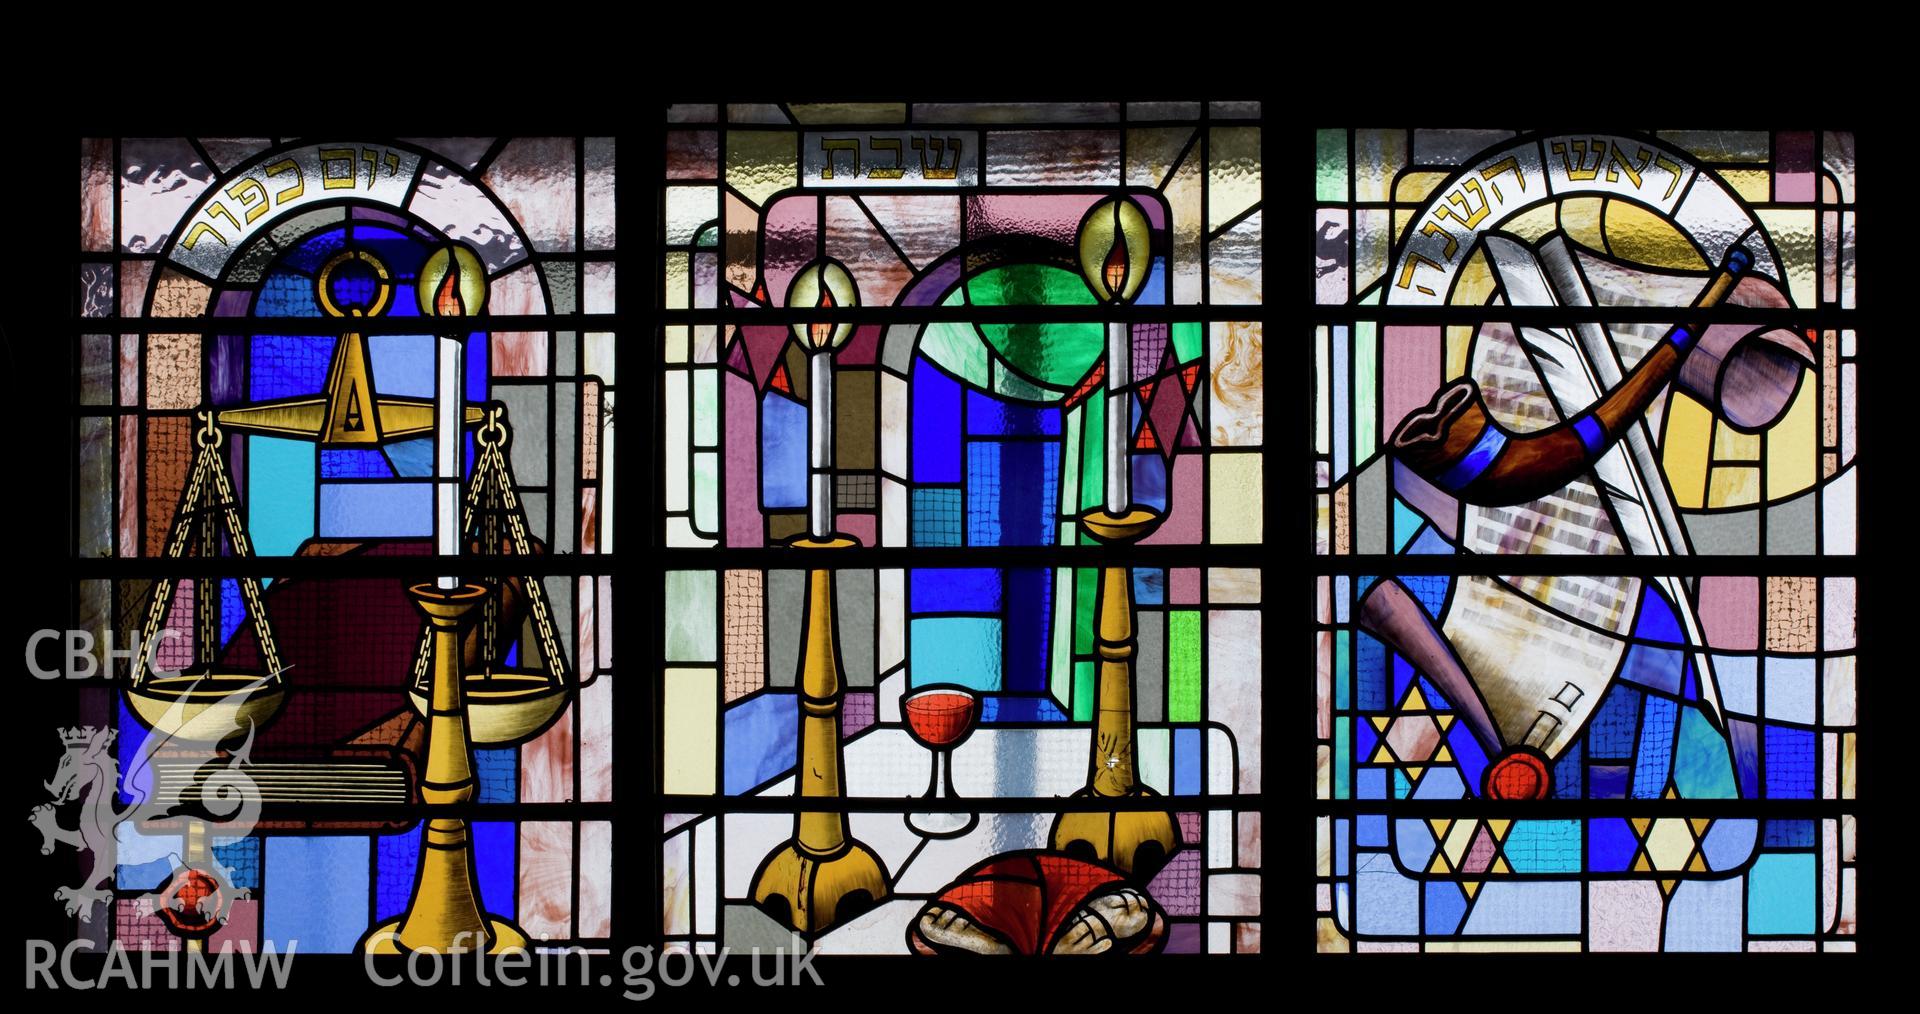 Stained glass window in east wall.